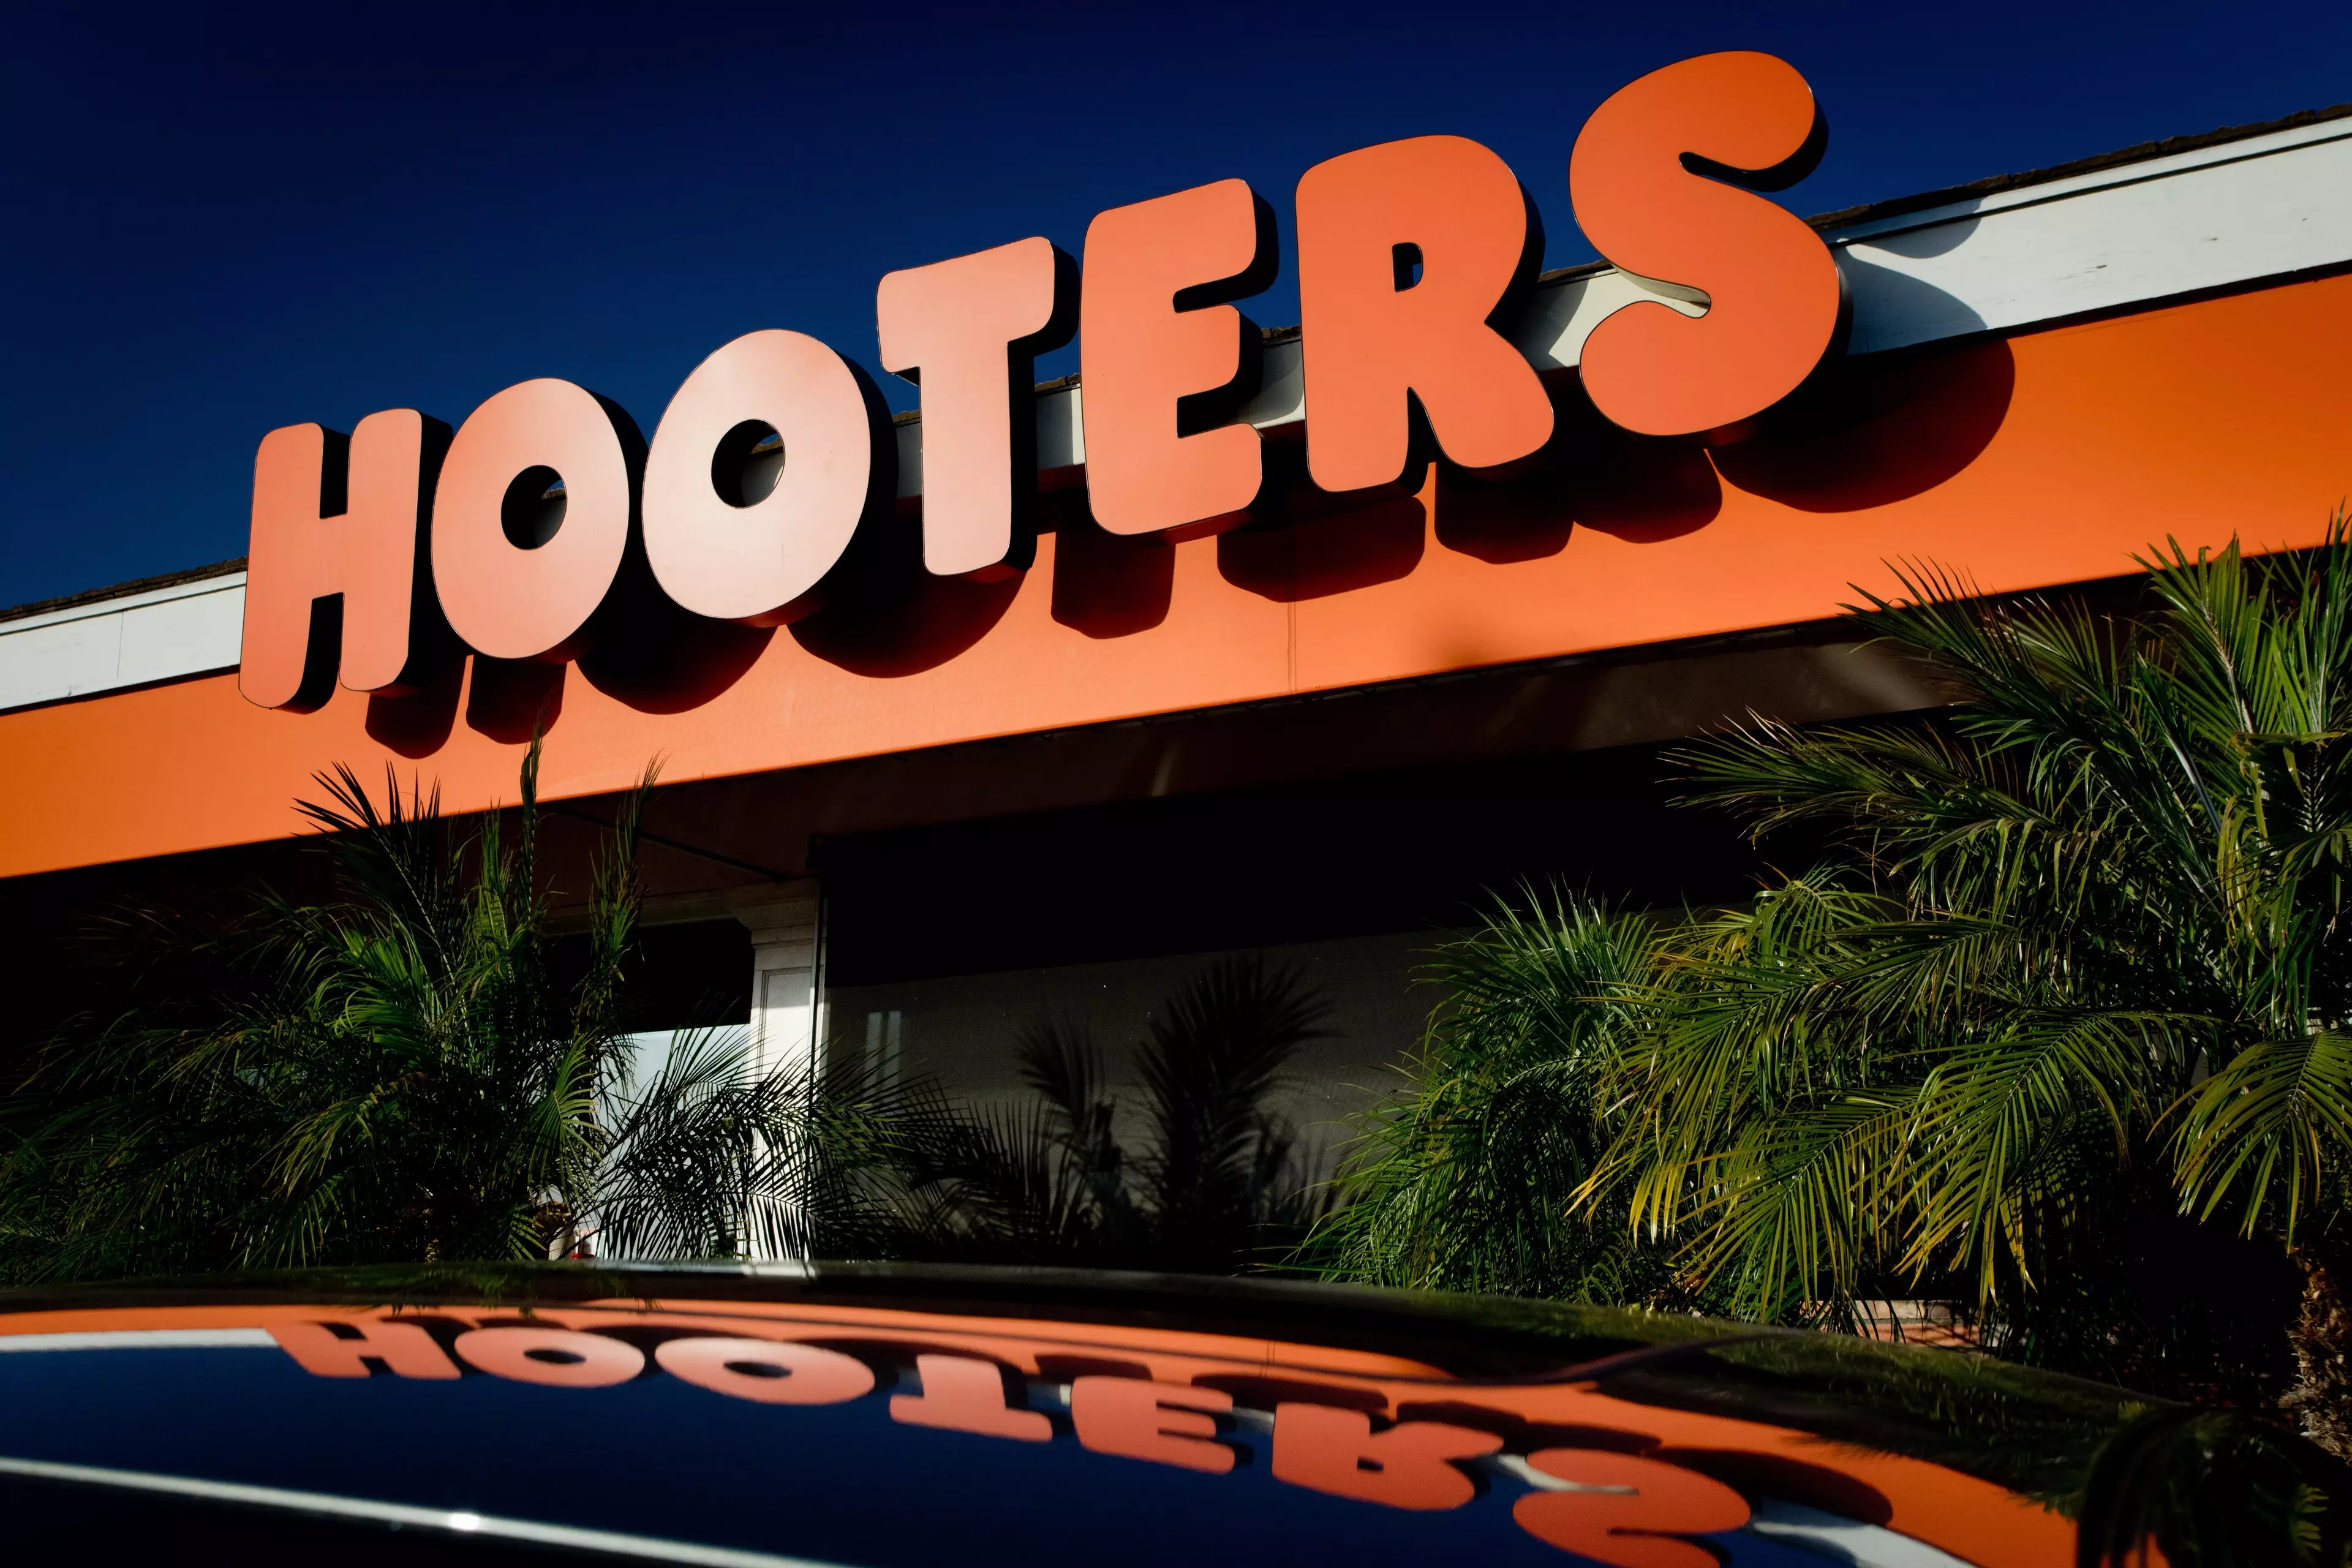 A high school football coach has come under fire for taking his team to Hooters.